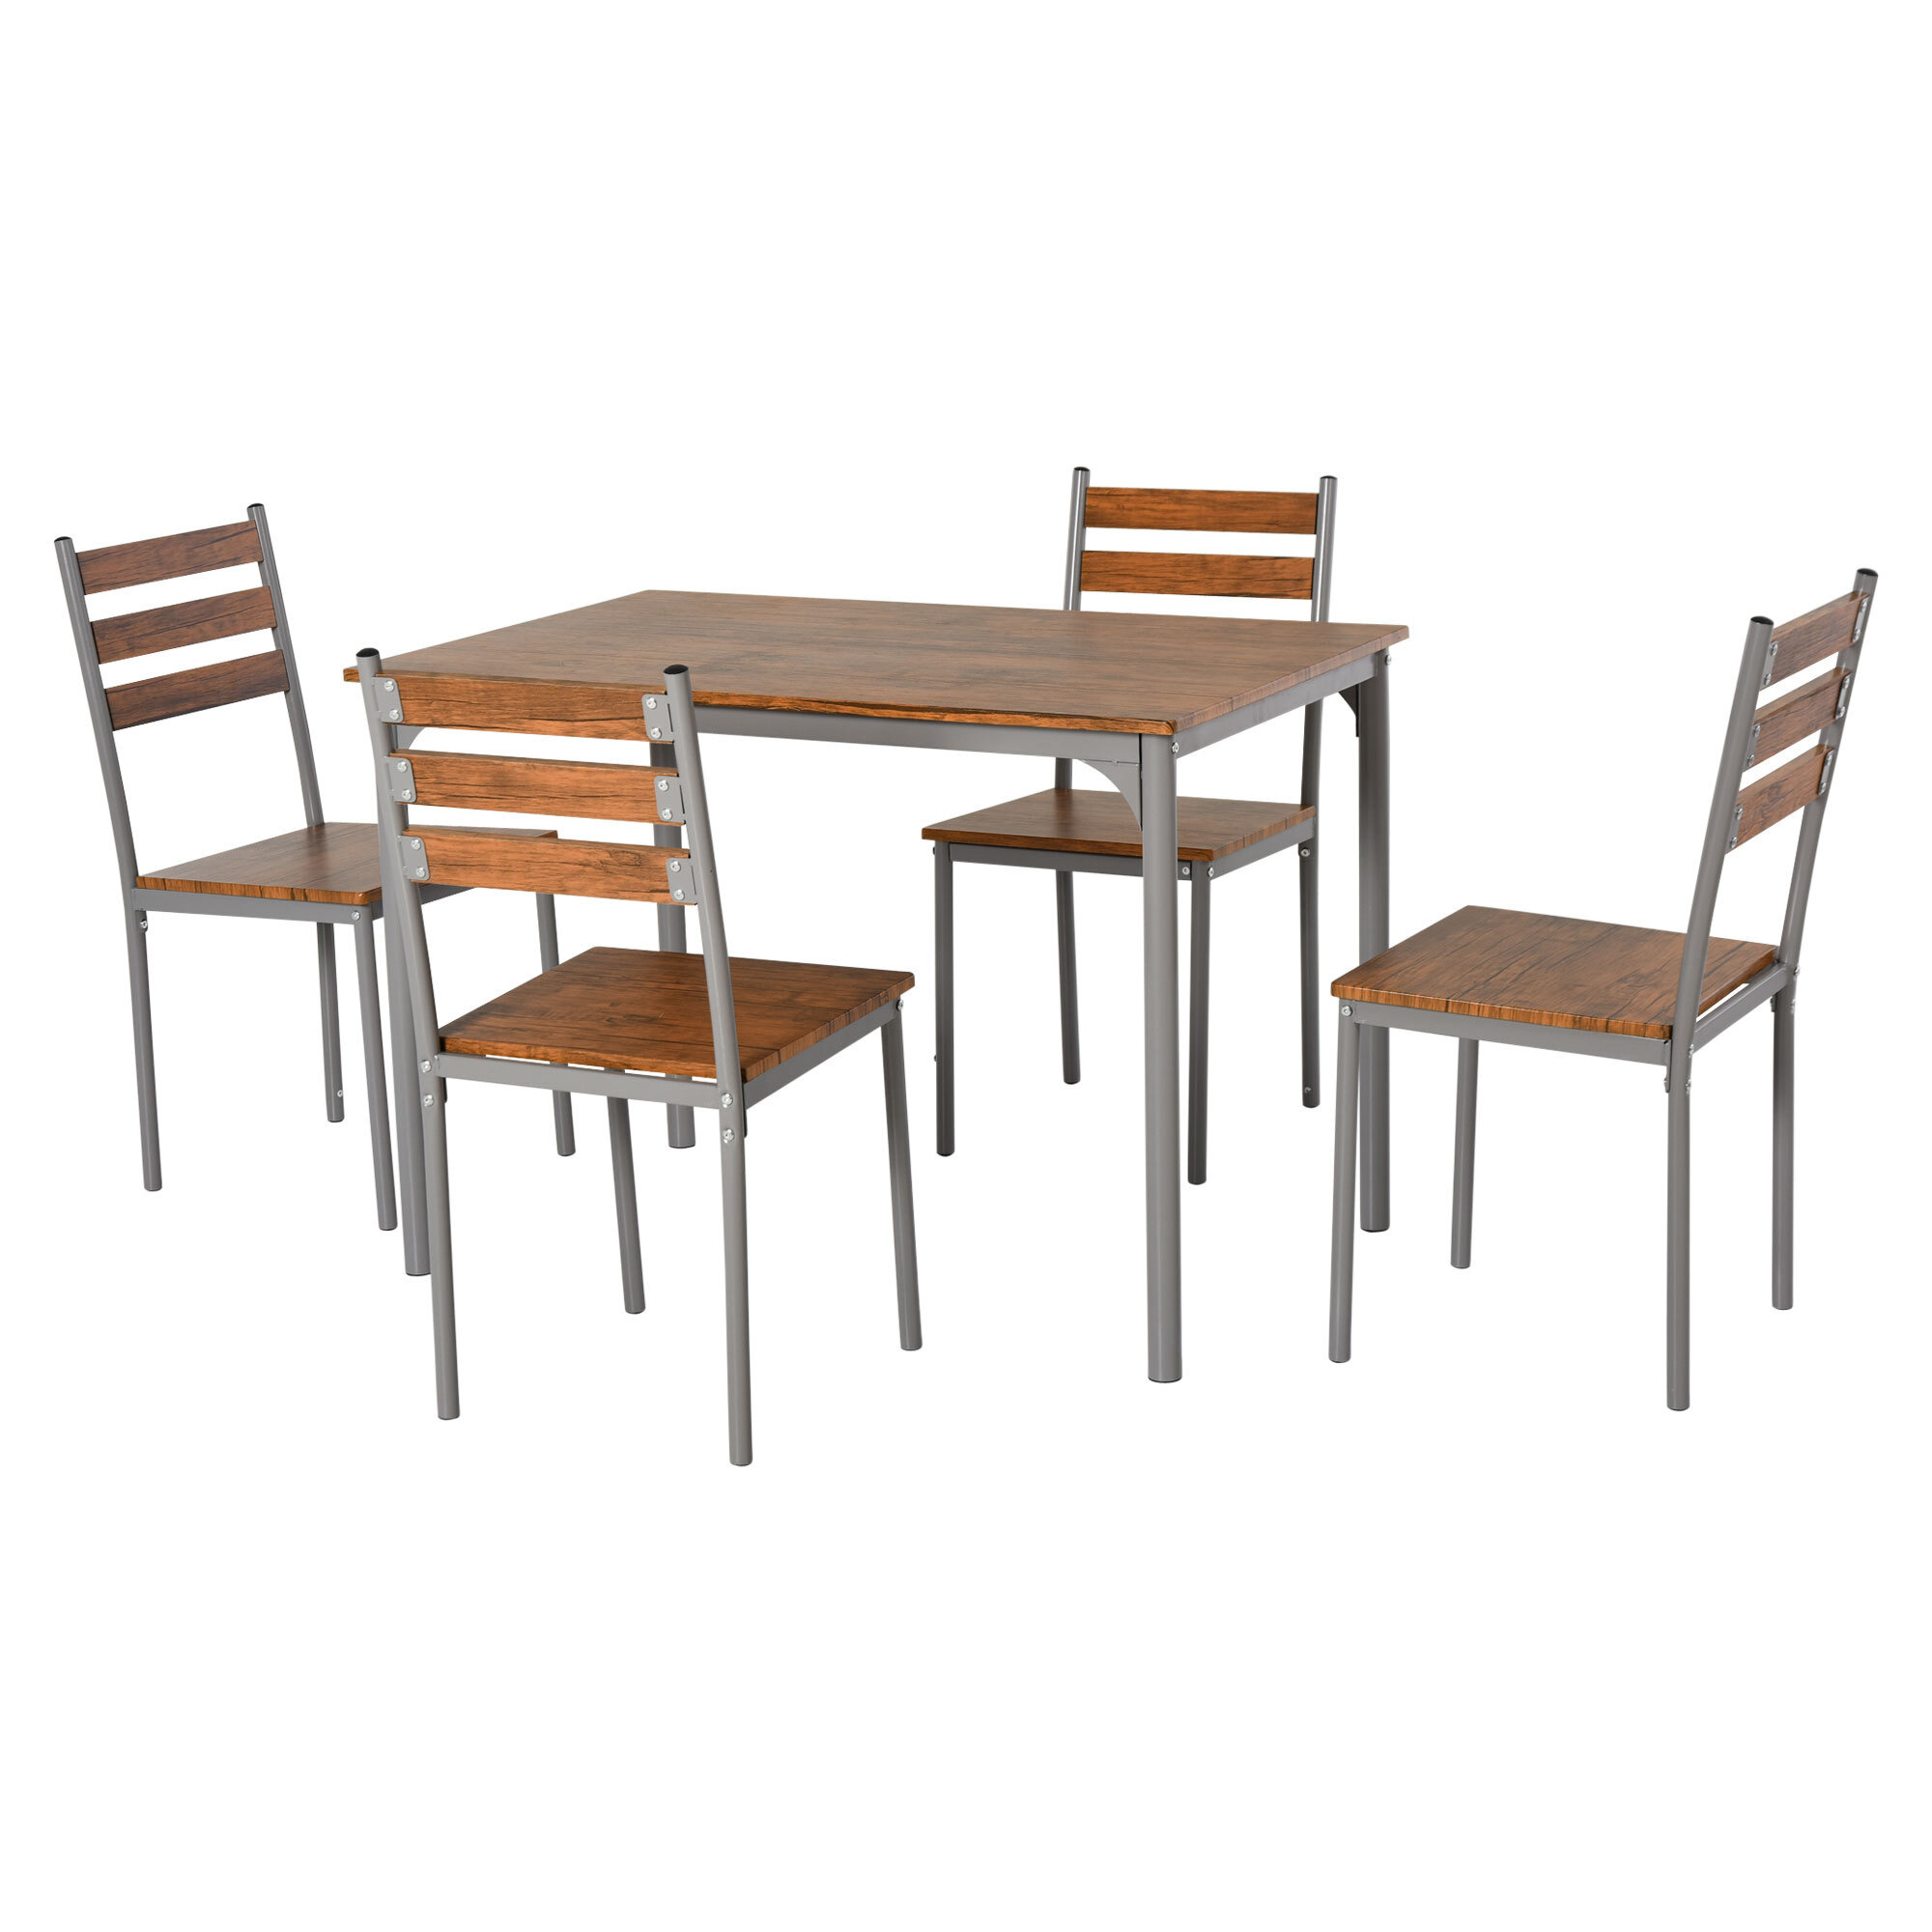 HOMCOM Modern 5-Piece Dining Table Set, Dining Table With 4 Chairs For Compact Dining Room& Kitchen, Brown